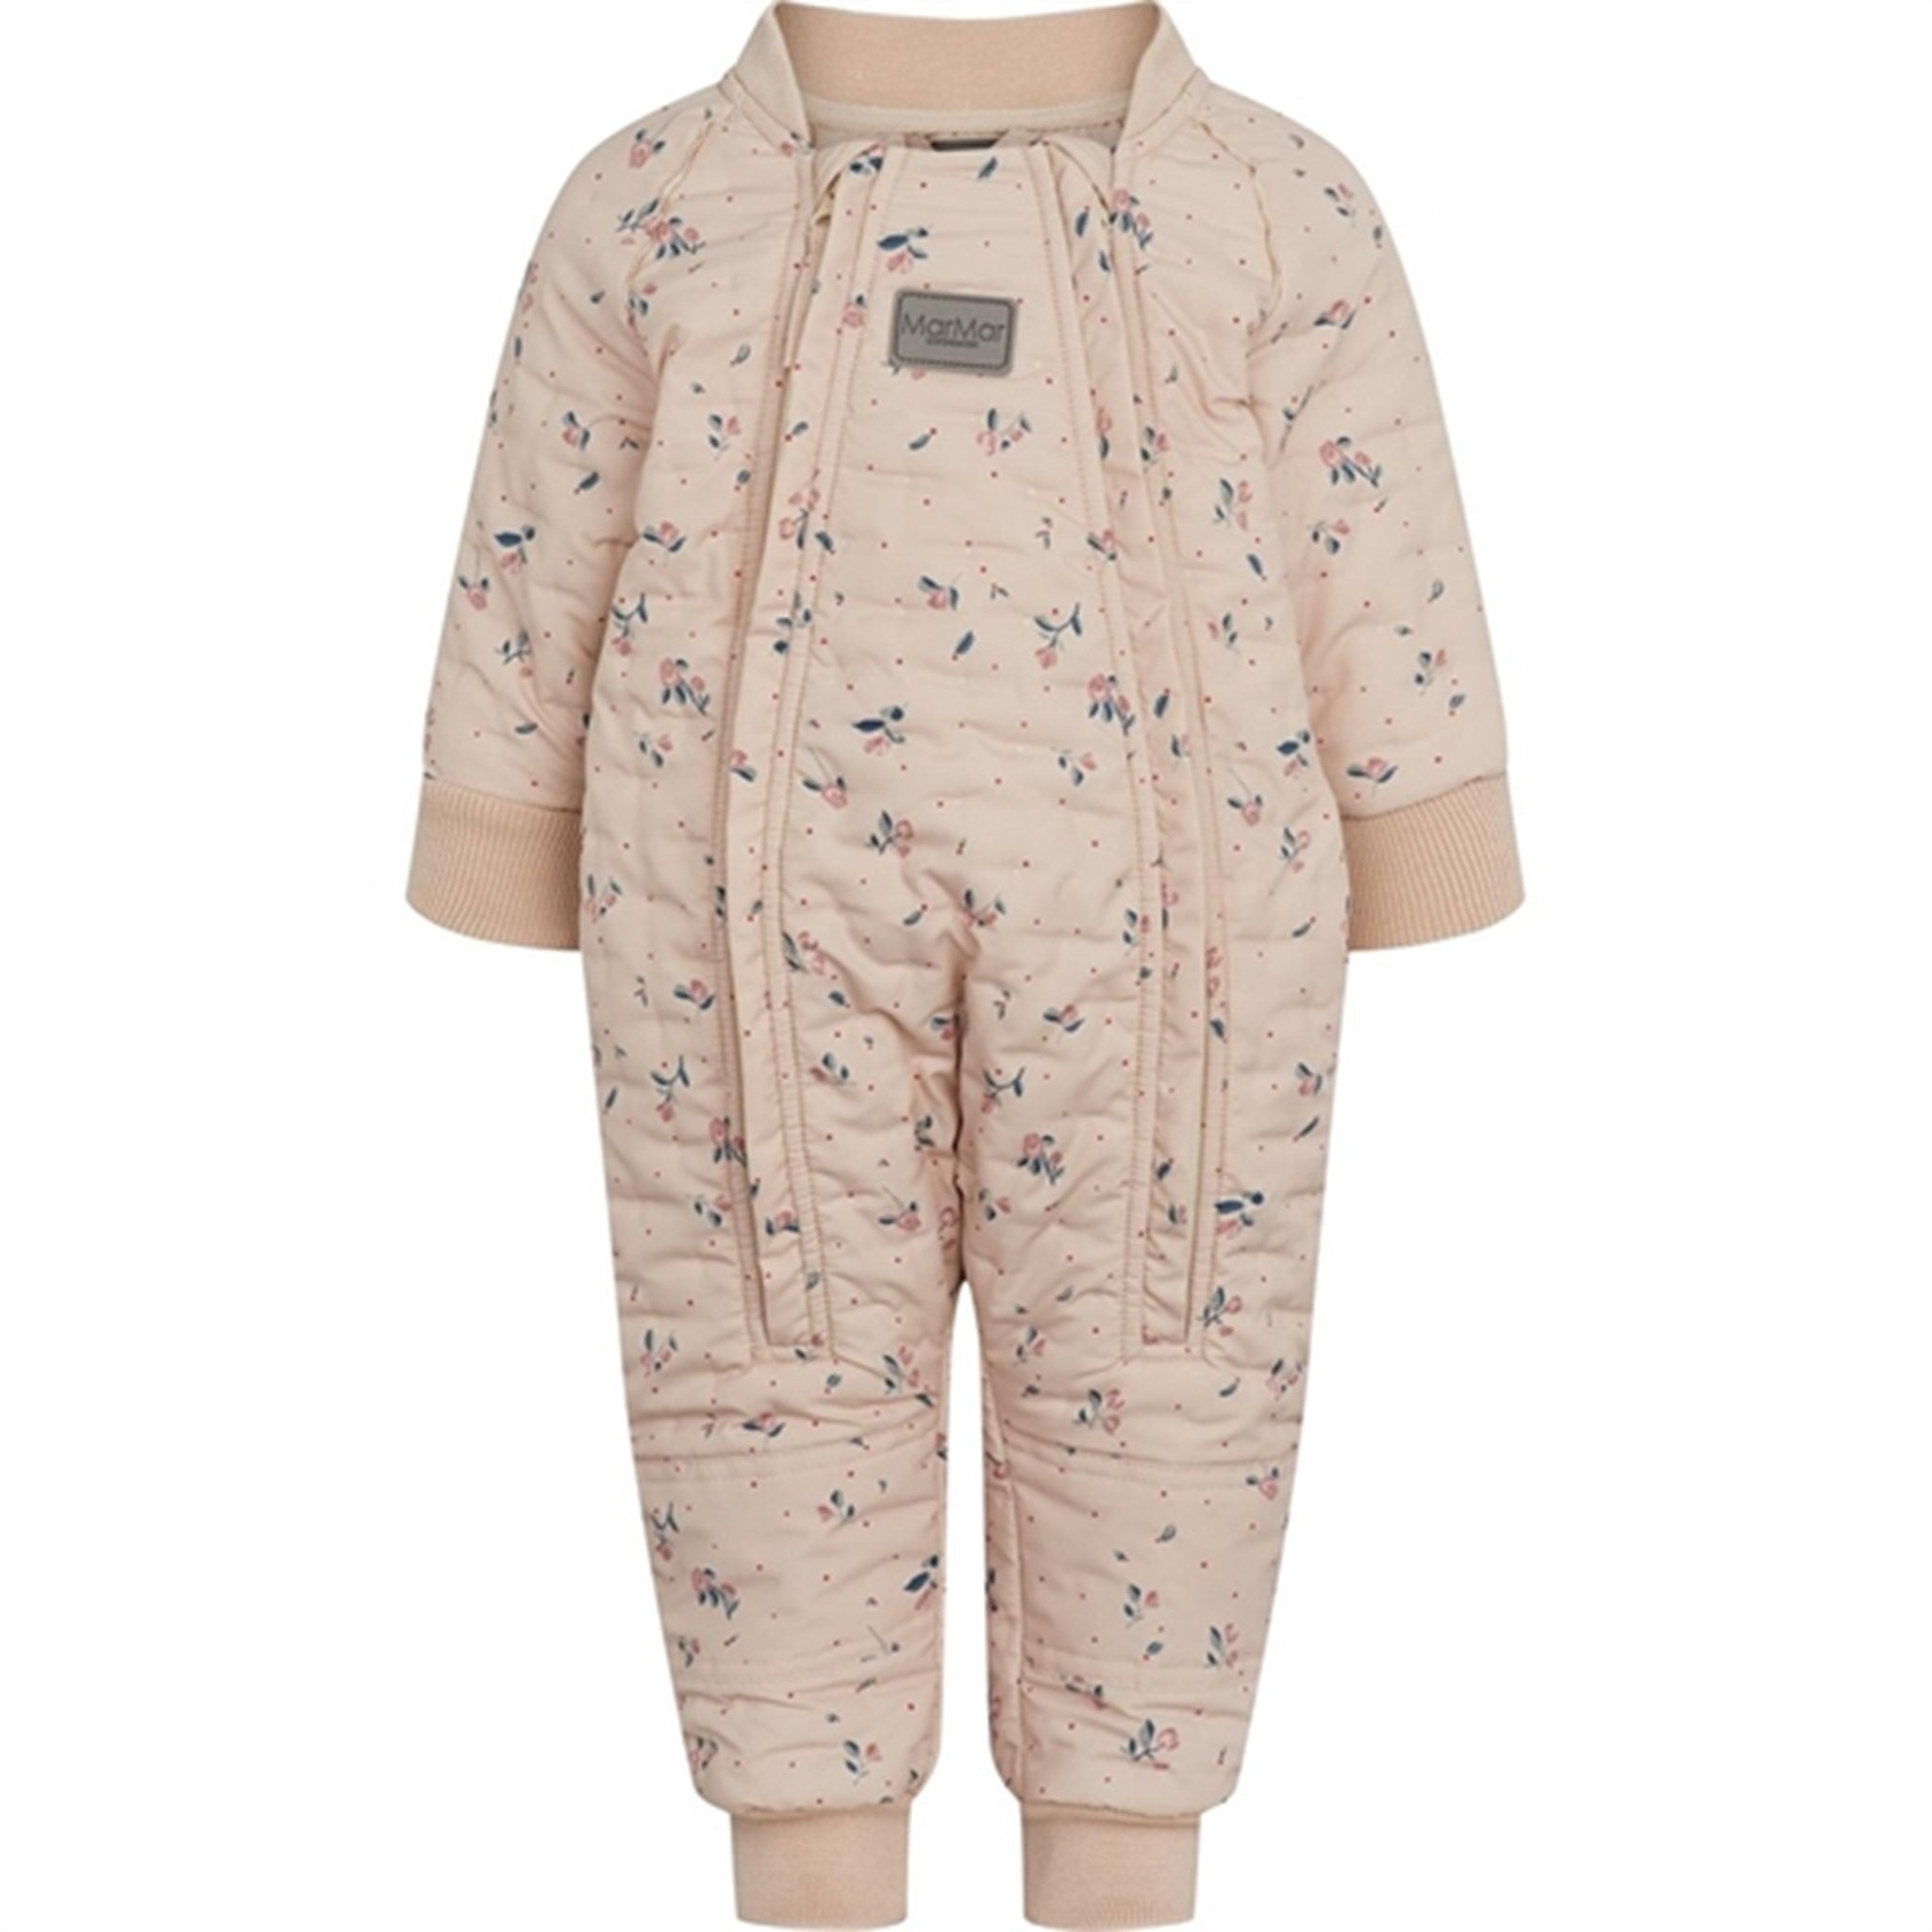 MarMar Floral Sprinkle Oza Thermo Suit